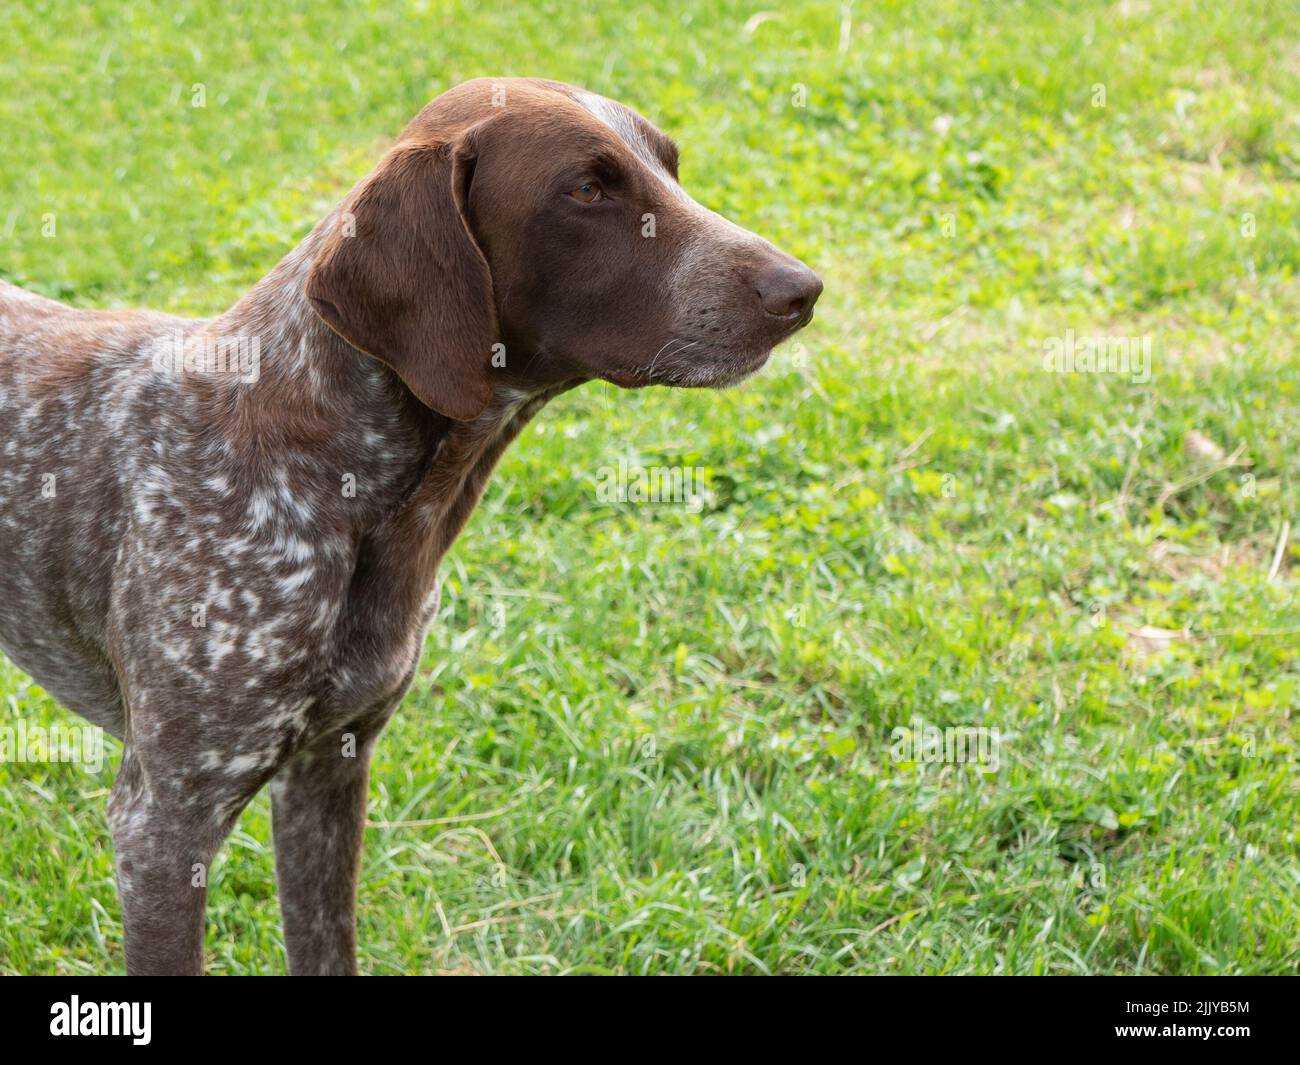 German Shorthaired Pointer (Kurzhaar) outdoor, copy space. Pointing dog, hunting breed Stock Photo